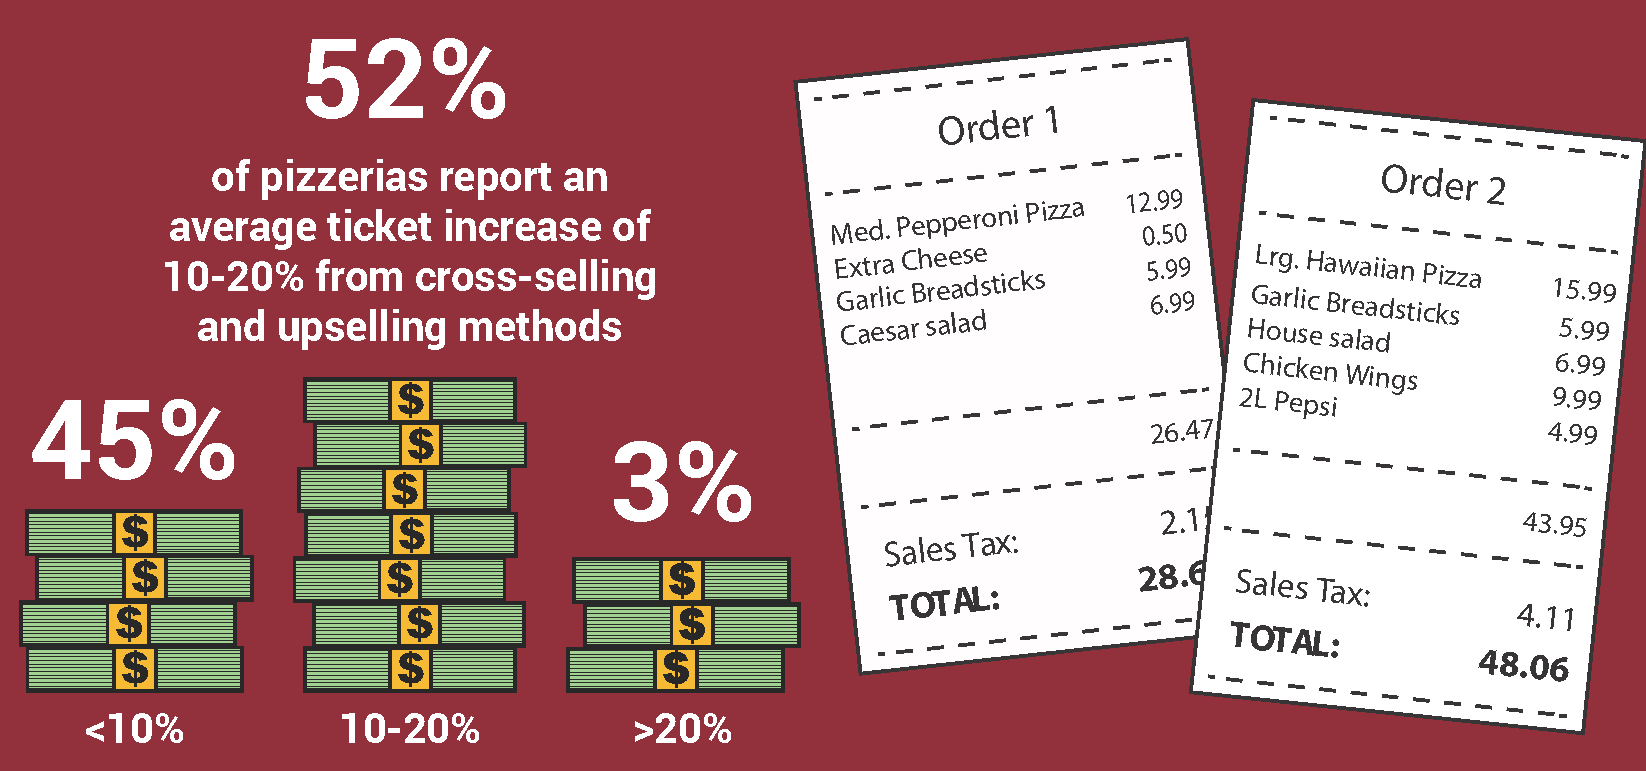 52% of pizzerias reported an average ticket increase of 10-20% from cross-selling and upselling methods